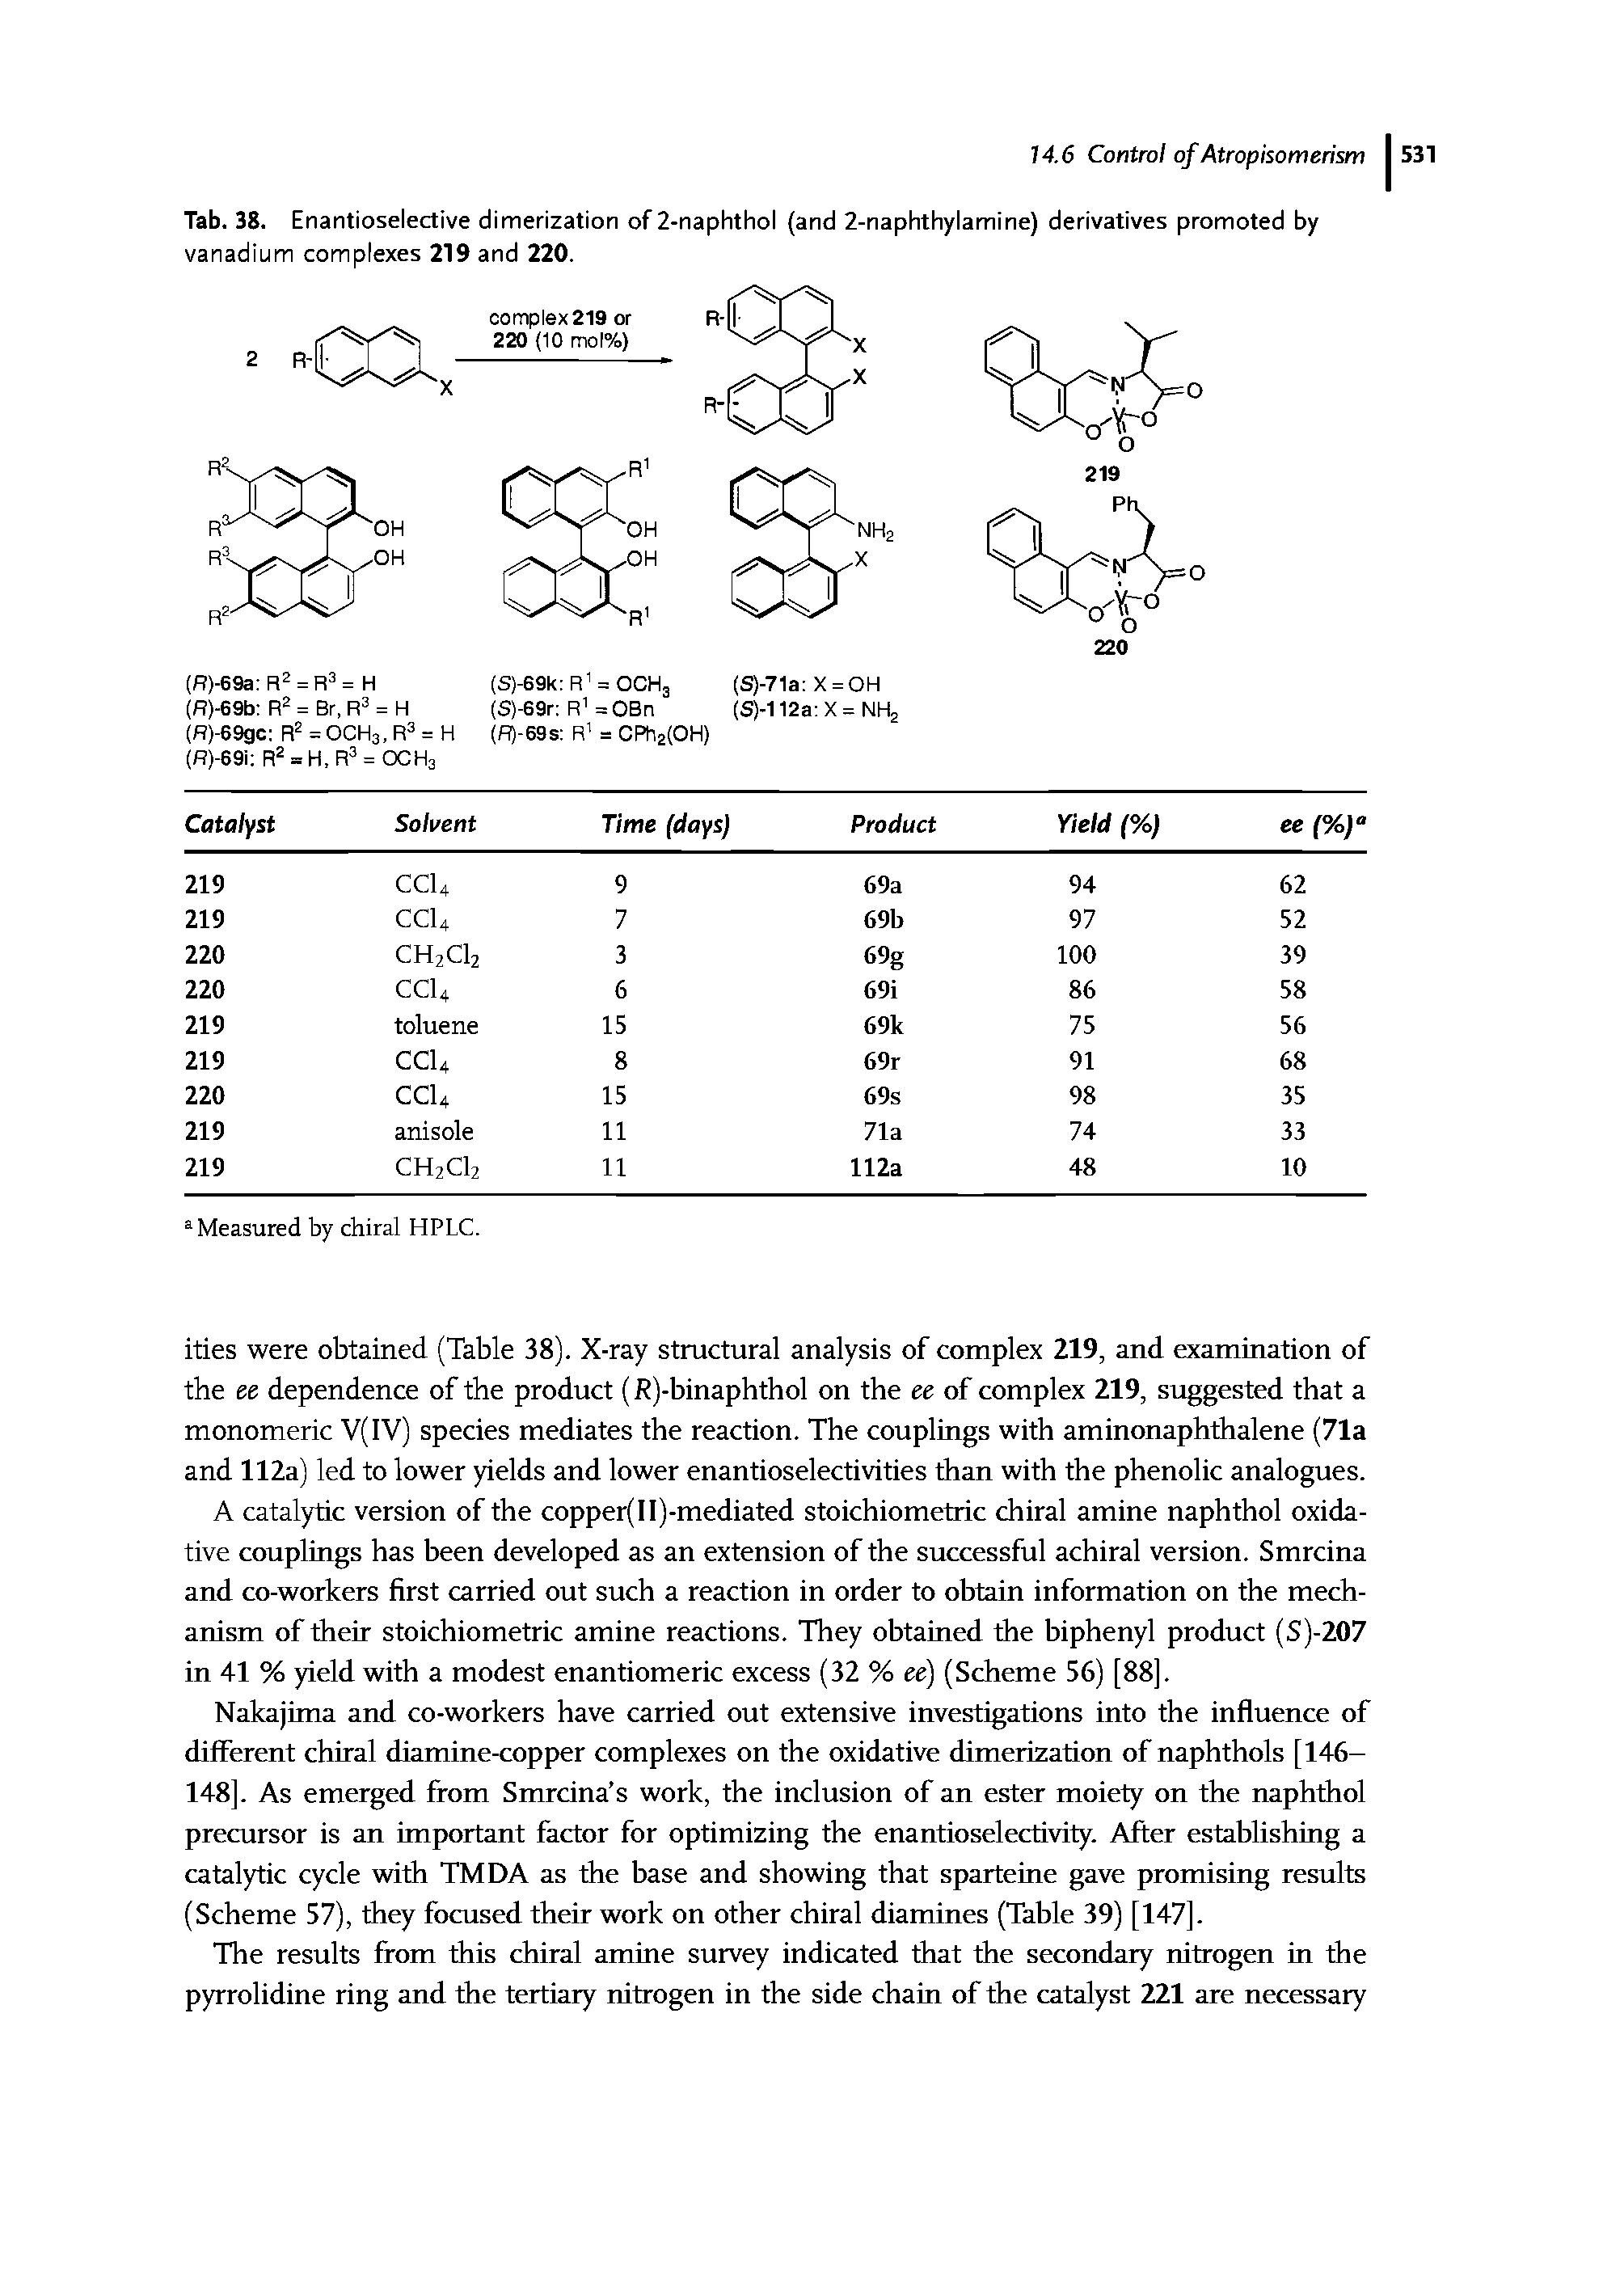 Tab. 38. Enantioselective dimerization of 2-naphthol (and 2-naphthylamine) derivatives promoted by vanadium complexes 219 and 220.